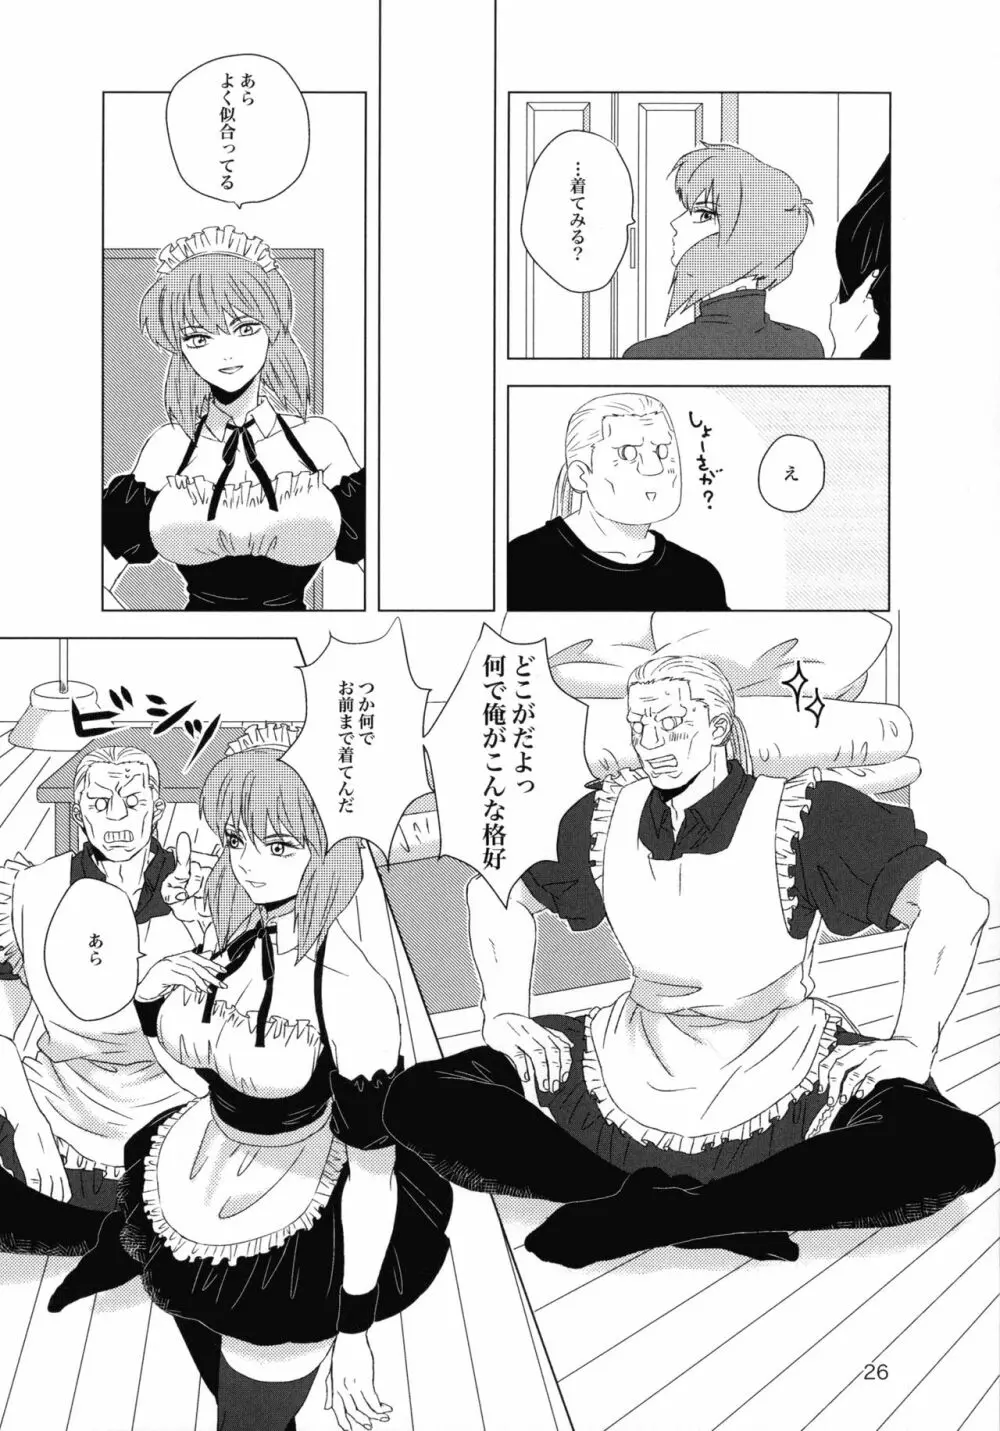 FRENCHMAIDCOSTUME BTMT - page26